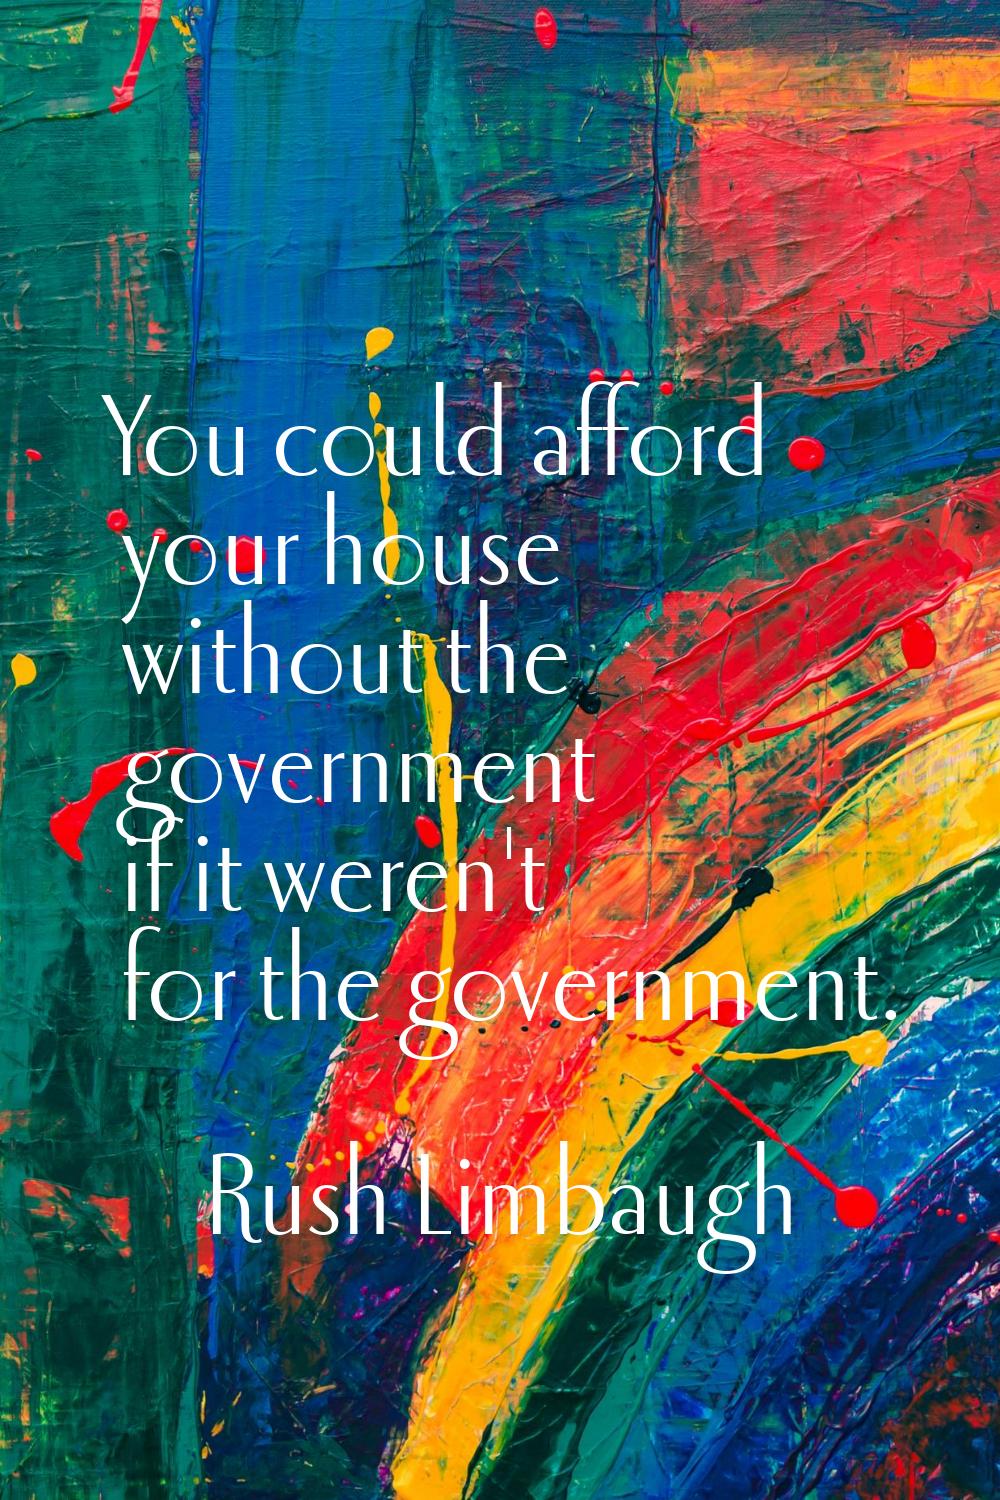 You could afford your house without the government if it weren't for the government.